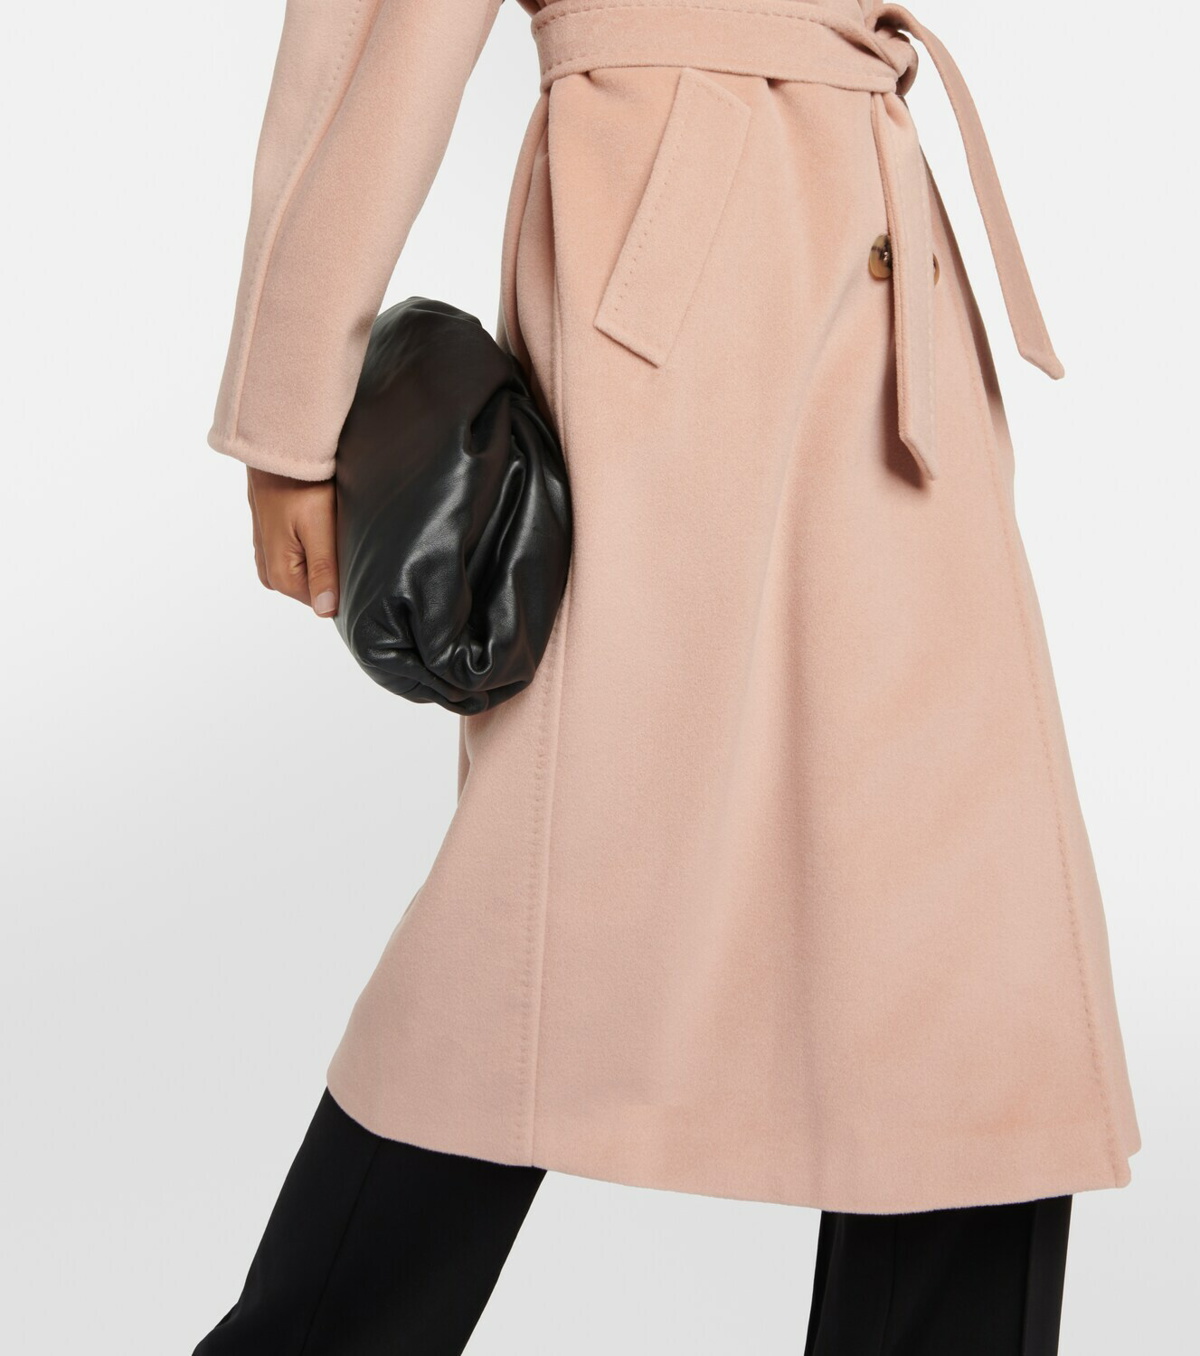 Madame wool and cashmere coat in brown - Max Mara